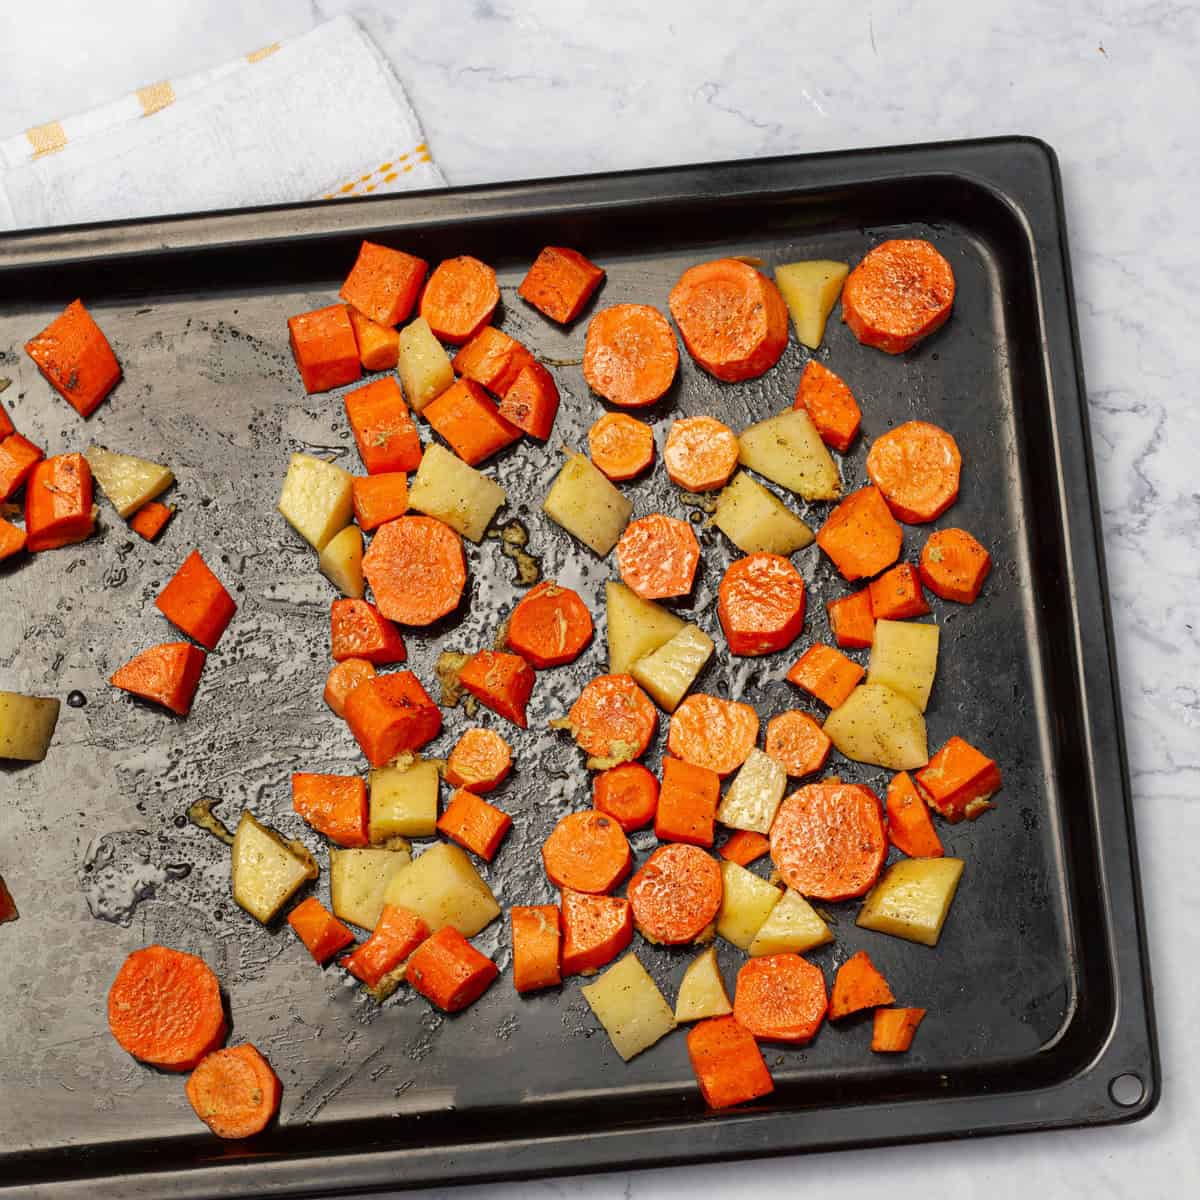 carrots and potato cubes spread in backing tray